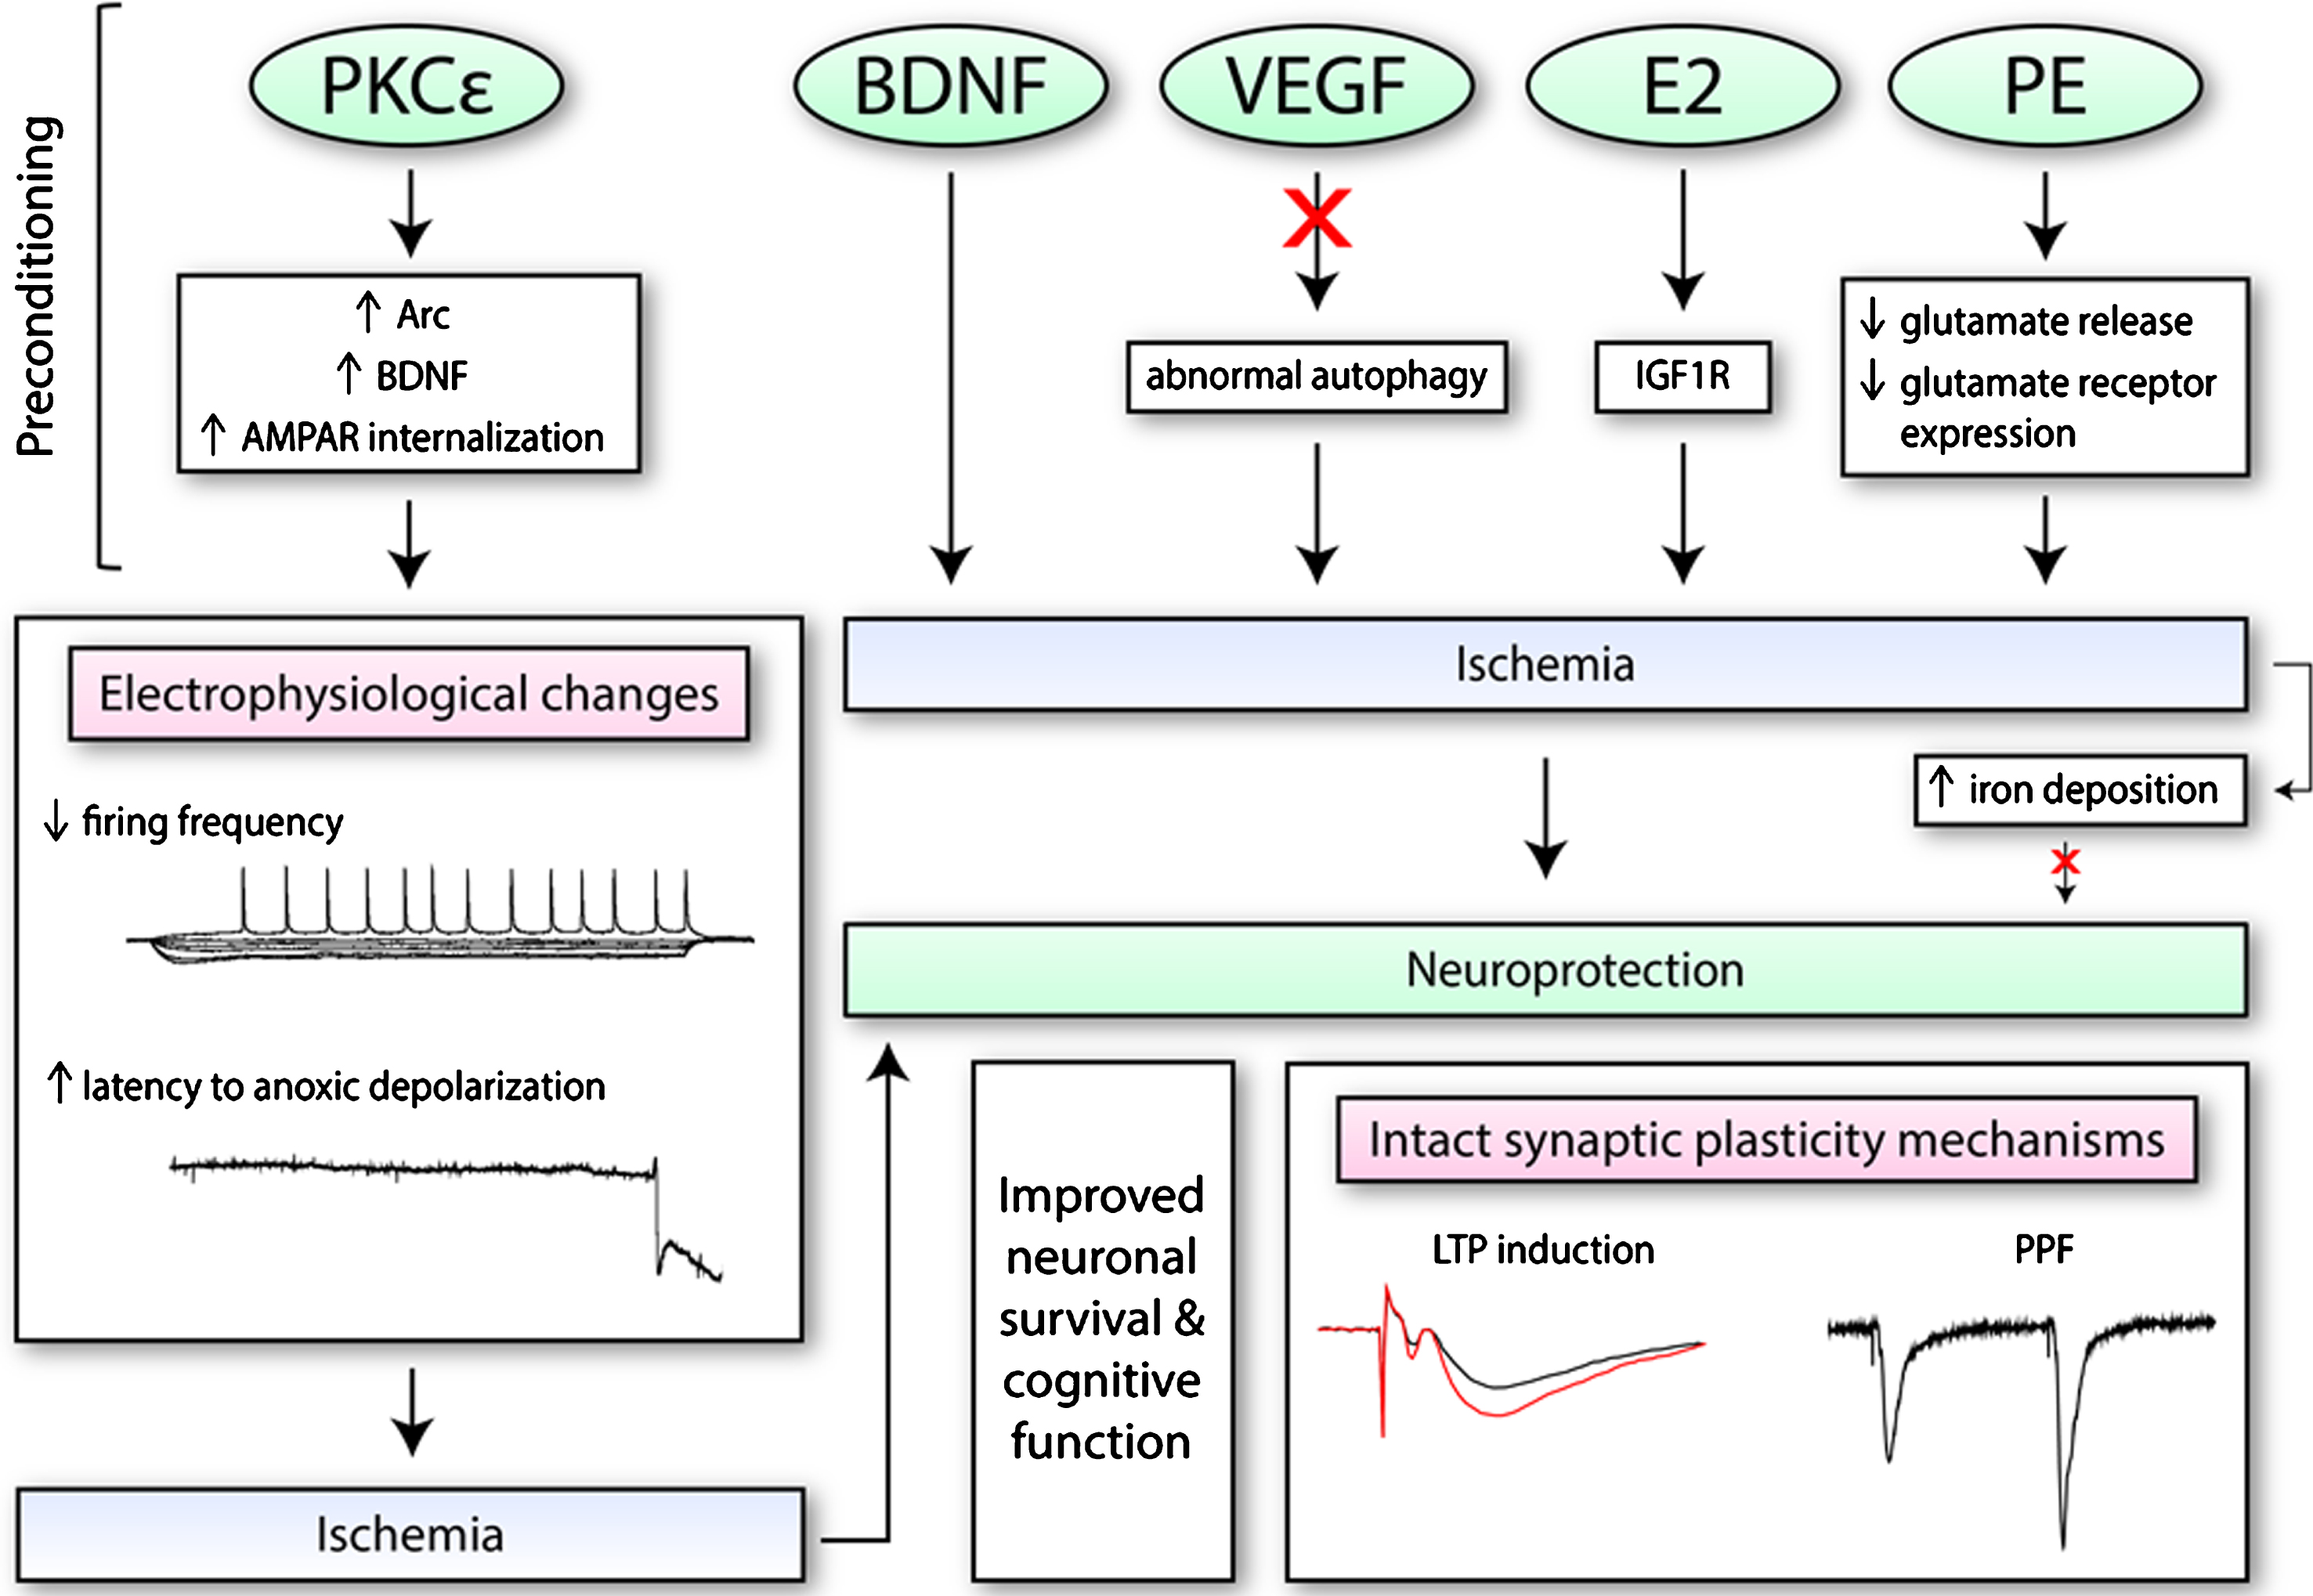 The effects of preconditioning molecules/therapies on electrophysiological function and synaptic plasticity. Numerous pharmacological mimetics of IPC (i.e., PKCɛ; brain-derived neurotrophic factor, BDNF; vascular endothelial growth factor-A, VEGF; and ovarian hormone 17β-oestradiol, E2) induce neuroprotection through different mechanisms. This includes the regulation of certain processes (i.e., autophagy), as well as increased expression of certain proteins or receptors on the synaptic membrane. These changes may alter electrophysiological properties of neurons, as seen with PKCɛ, such as decreasing firing frequency. When exposed to conditions of oxygen and glucose deprivation, PKCɛ may also increase the latency to anoxic depolarization. Preconditioning therapies such as physical exercise (PE) training is also protective. PE along with BDNF, VEGF, and E2 have been found to retain both short-term and long-term synaptic plasticity processes after ischemia. Additionally, since iron accumulates in the cell after ischemia and exacerbates oxidative stress, it has also been a target of interest.